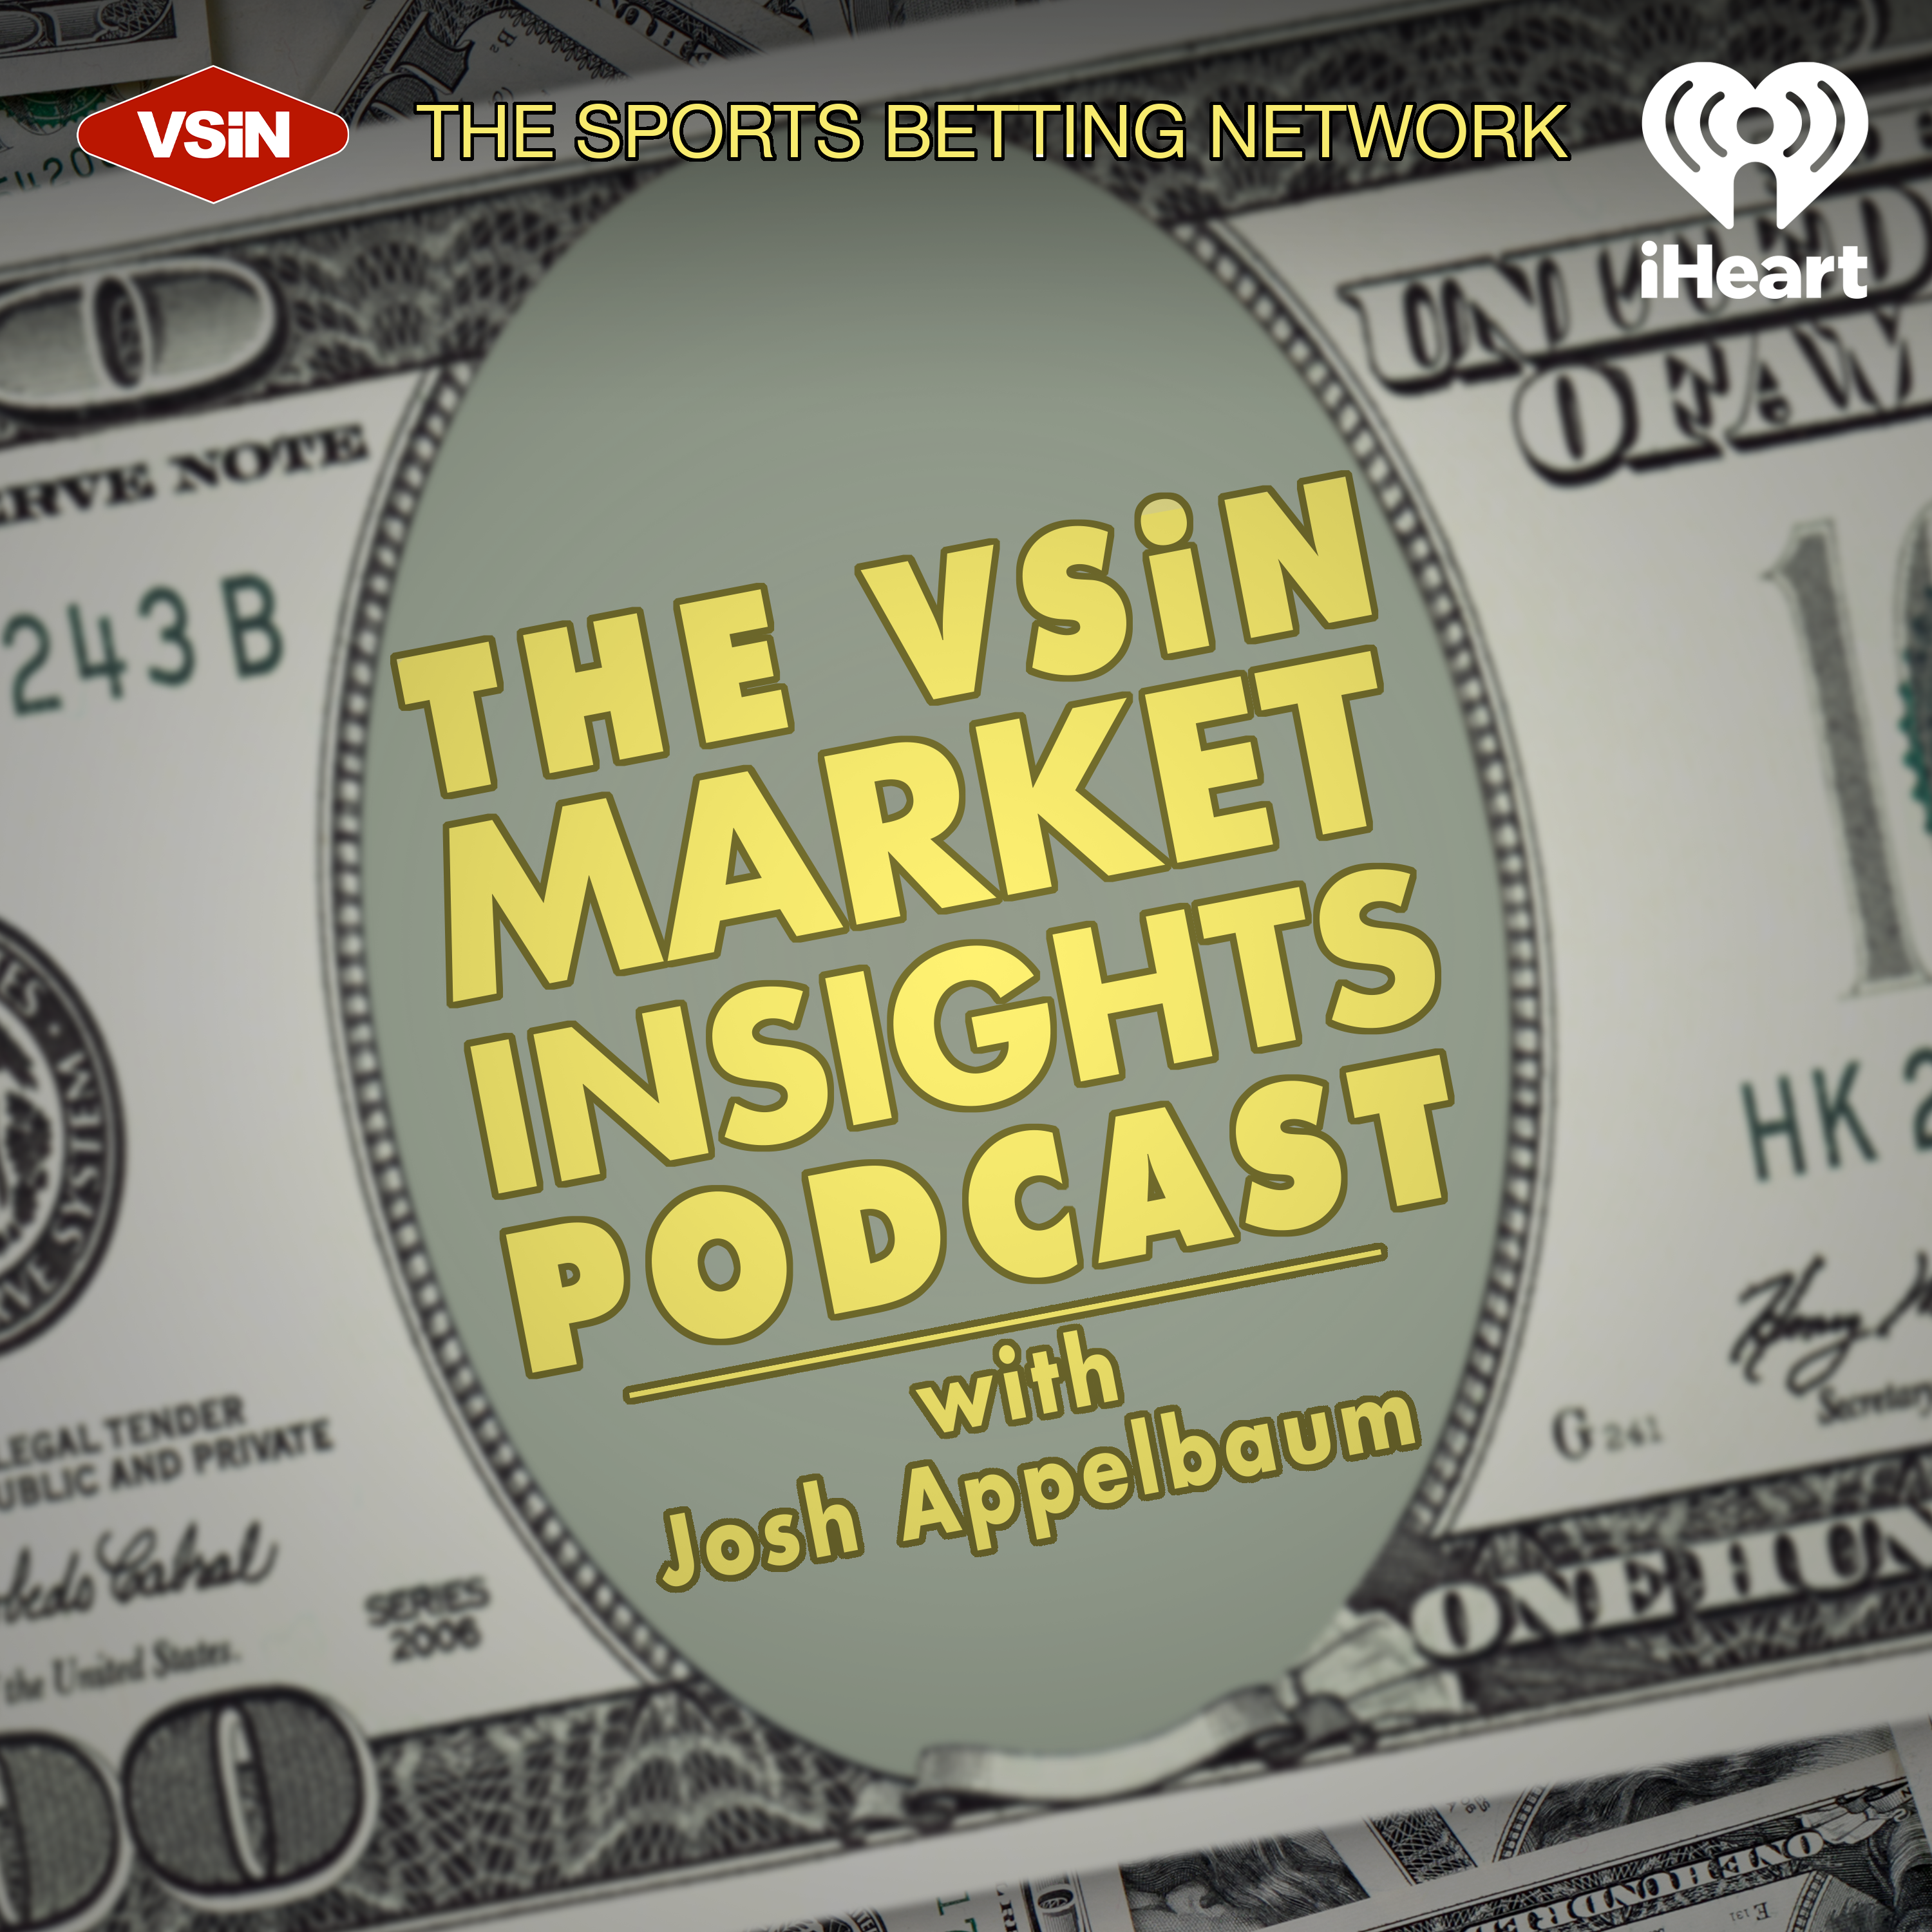 The VSiN Market Insights Podcast with Josh Appelbaum | March 29, 2022